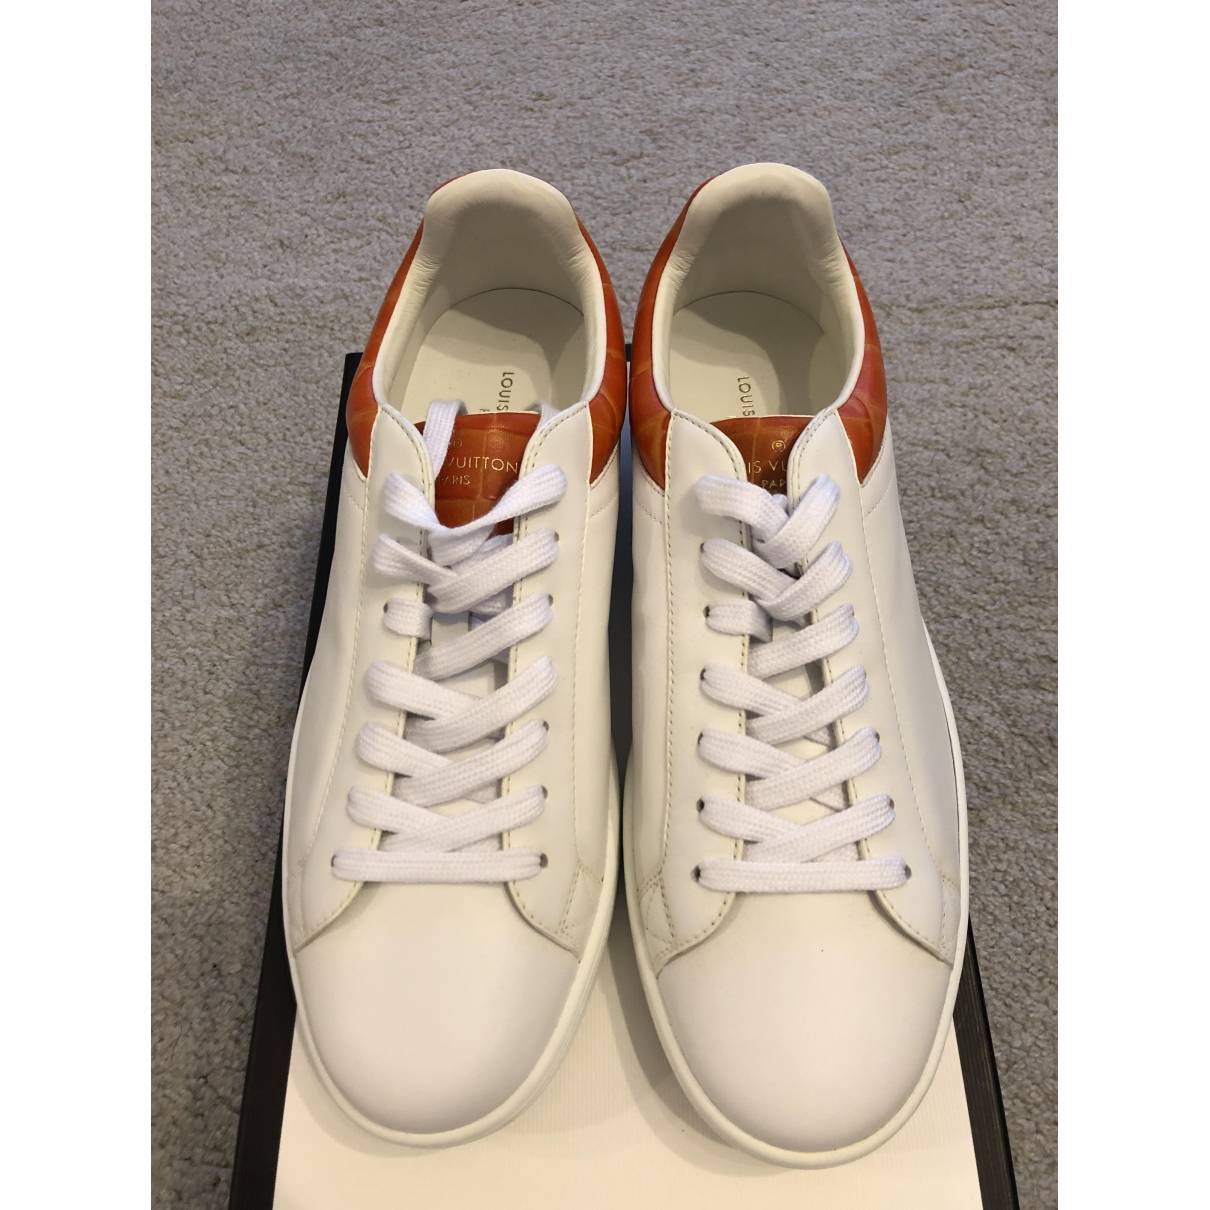 Luxembourg leather low trainers Louis Vuitton White size 8 UK in Leather -  37984787